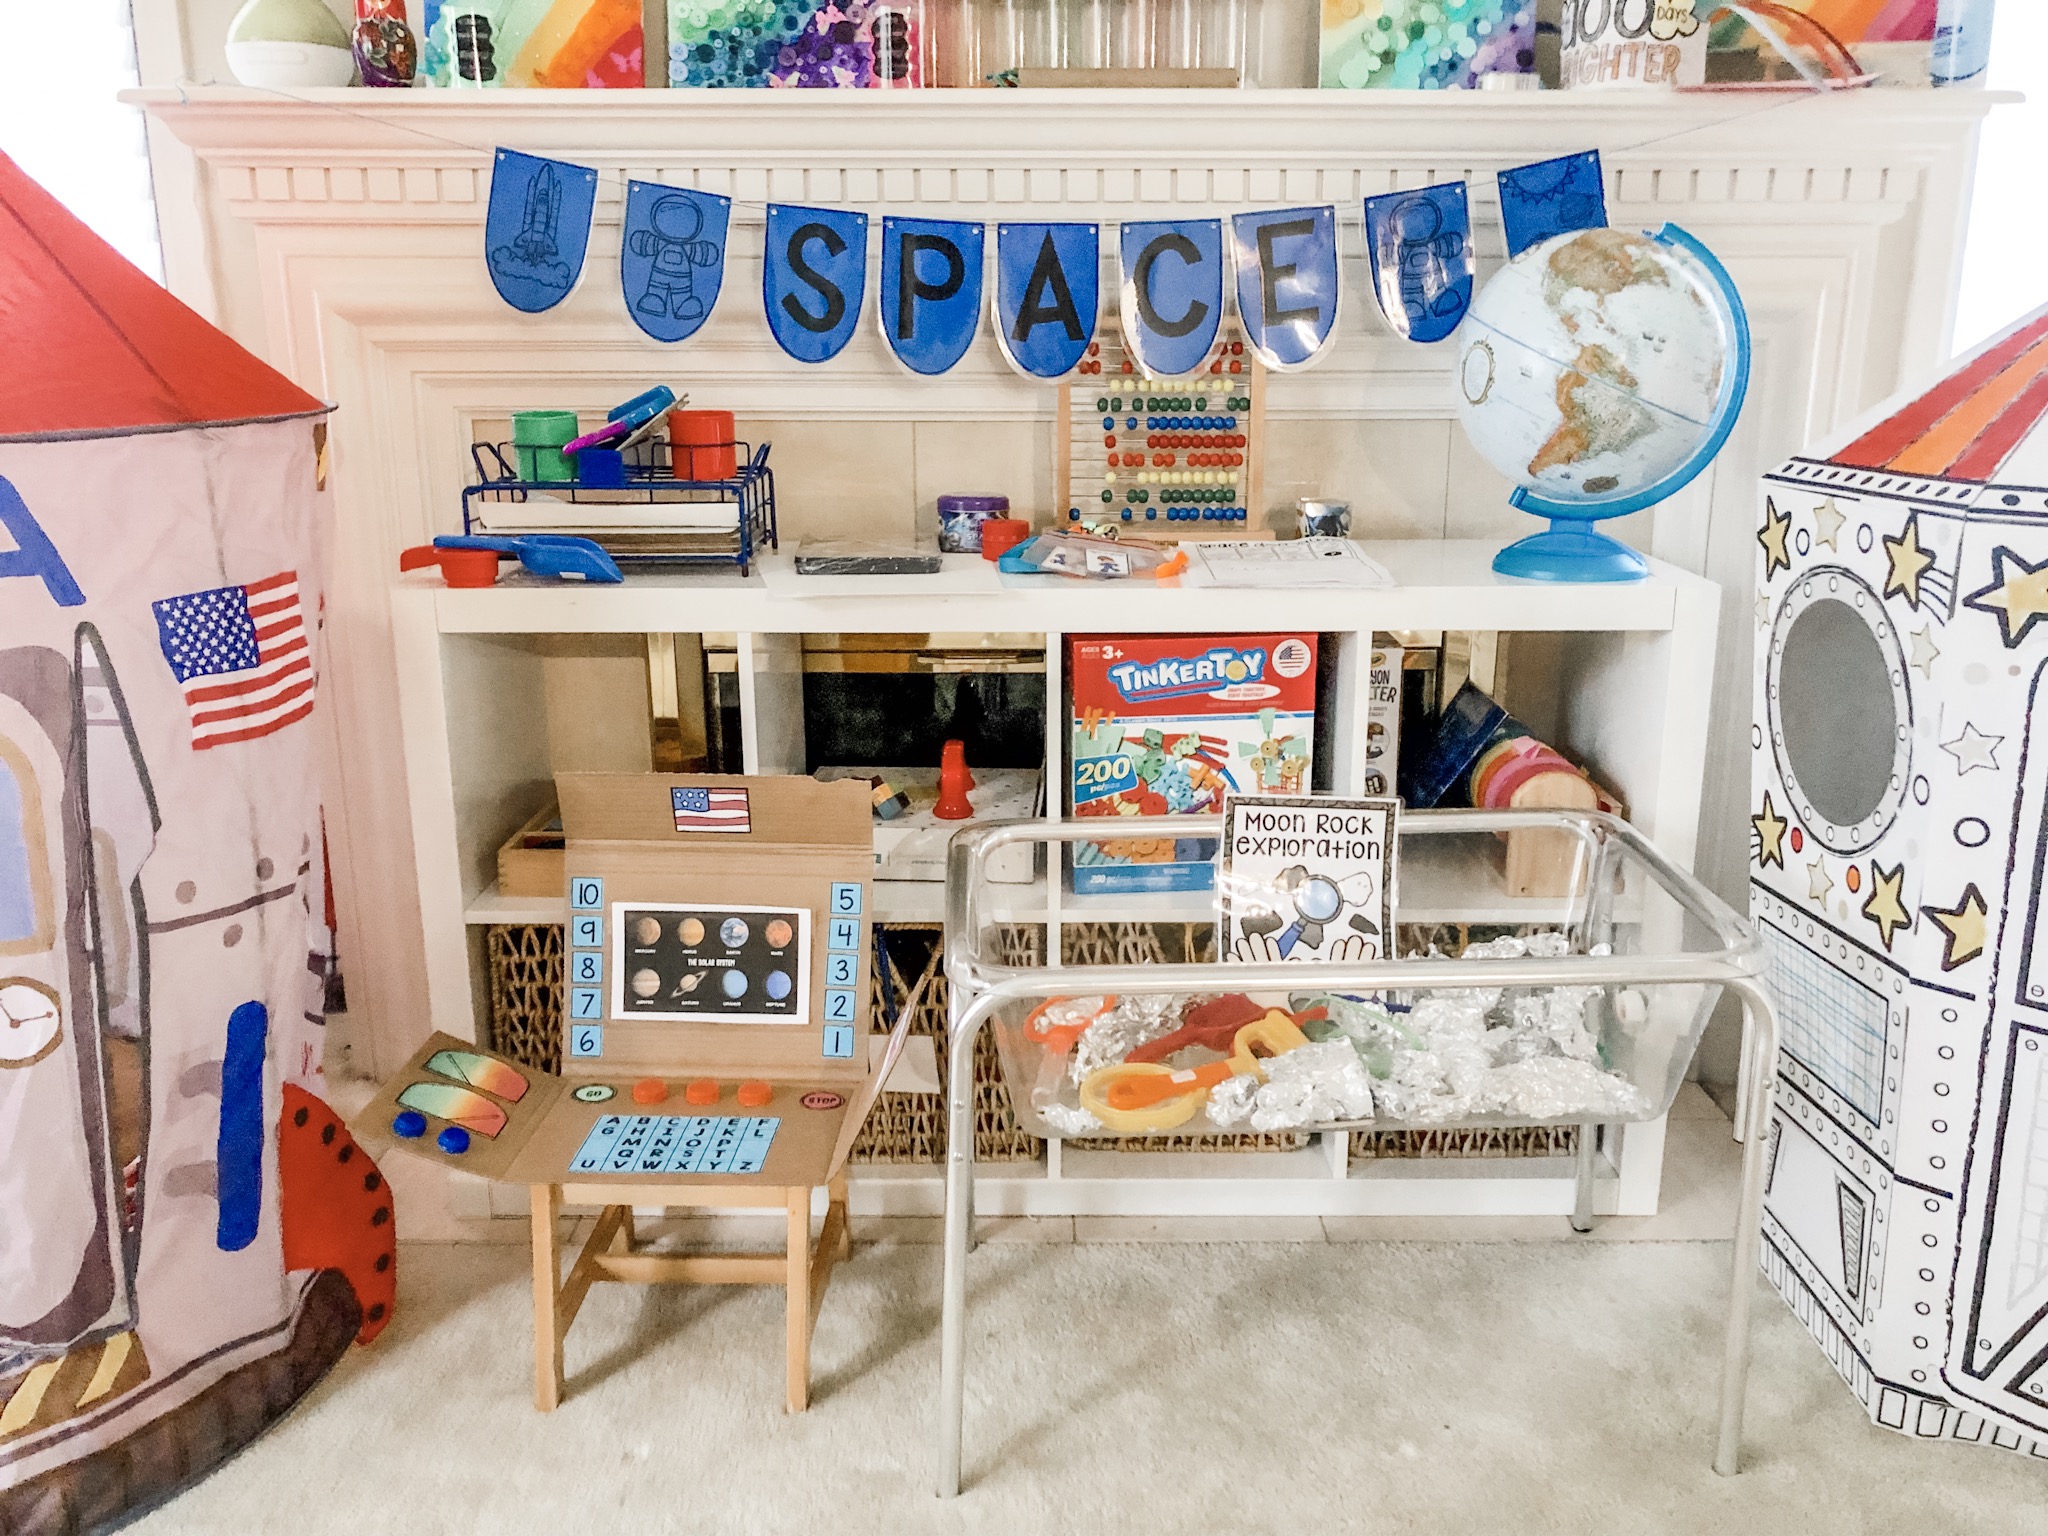 3...2...1... Blast Off.  Our Dramatic Play center is complete with our very own Space Station.  They will be learning through play as they explore Outer Space, dig for moon rocks, and even try out some Astronaut Ice Cream.  